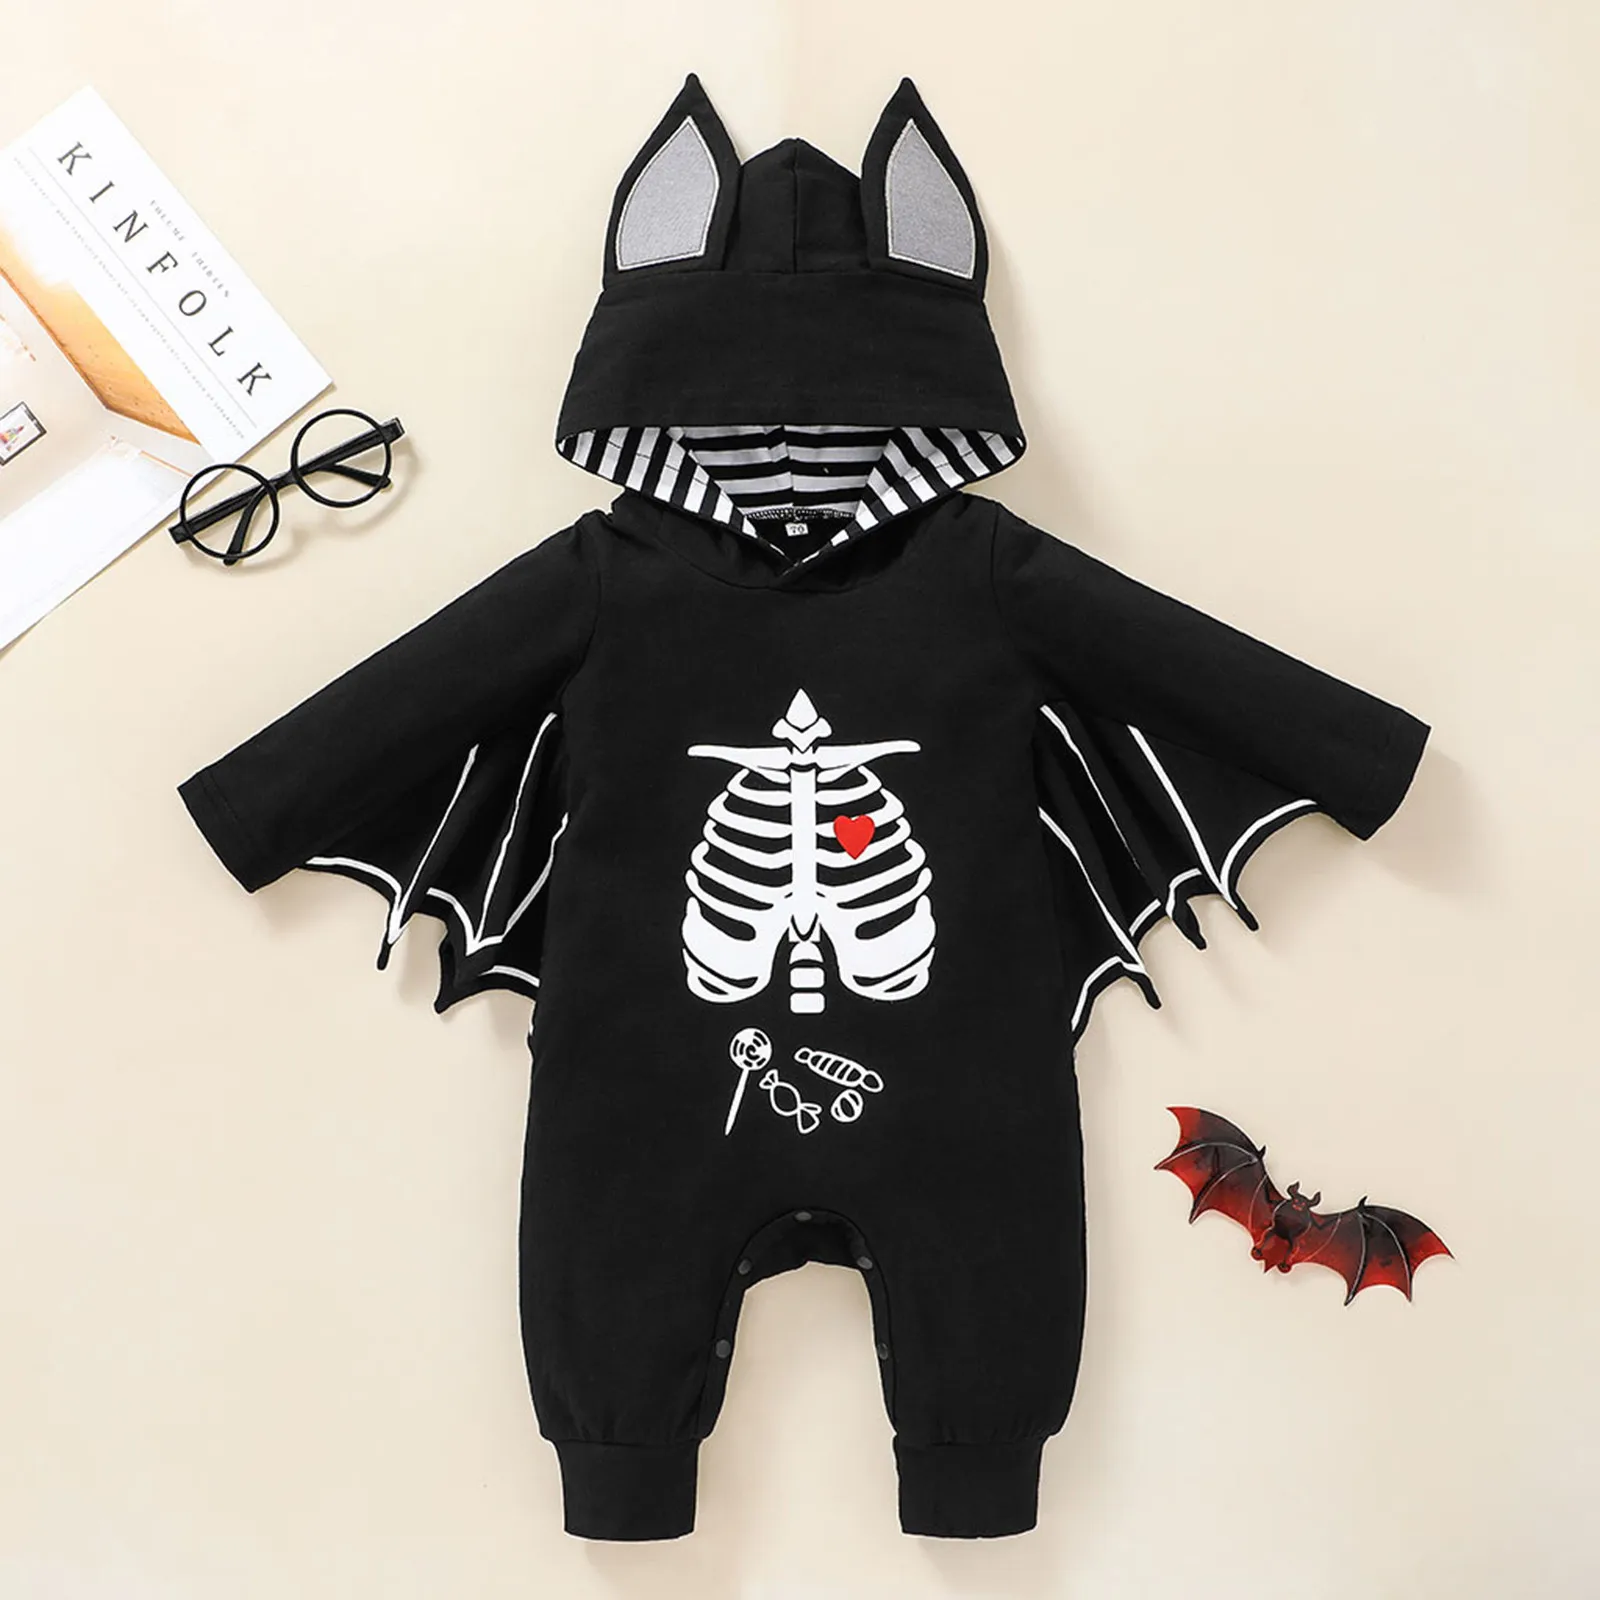 Baby Clothes For Baby Hooded Romper Autumn Winter Boy Girl Clothes Bat Long Sleeve Kids Newborn Jumpsuit Halloween Costumes best Baby Bodysuits